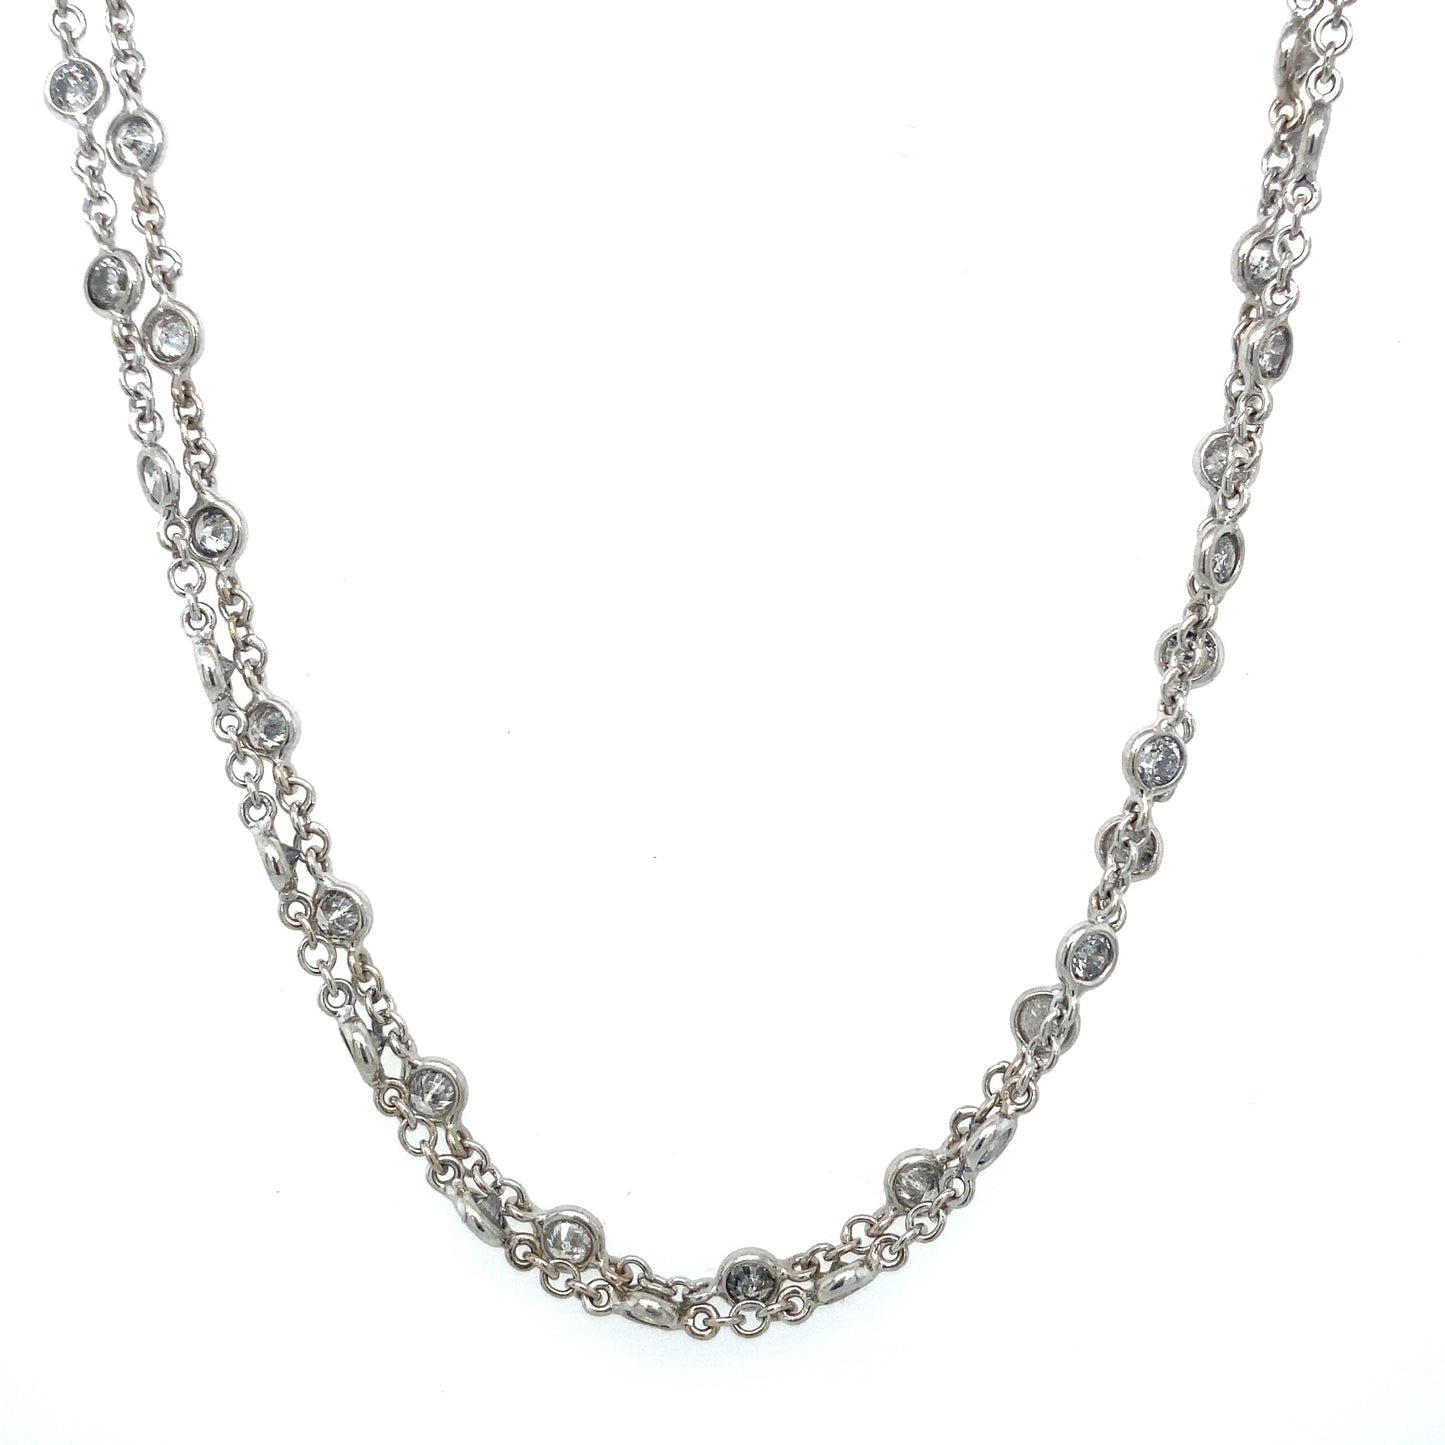 Circa 2000s 3.0 CTW 36" Diamond Station Necklace in 18K White Gold